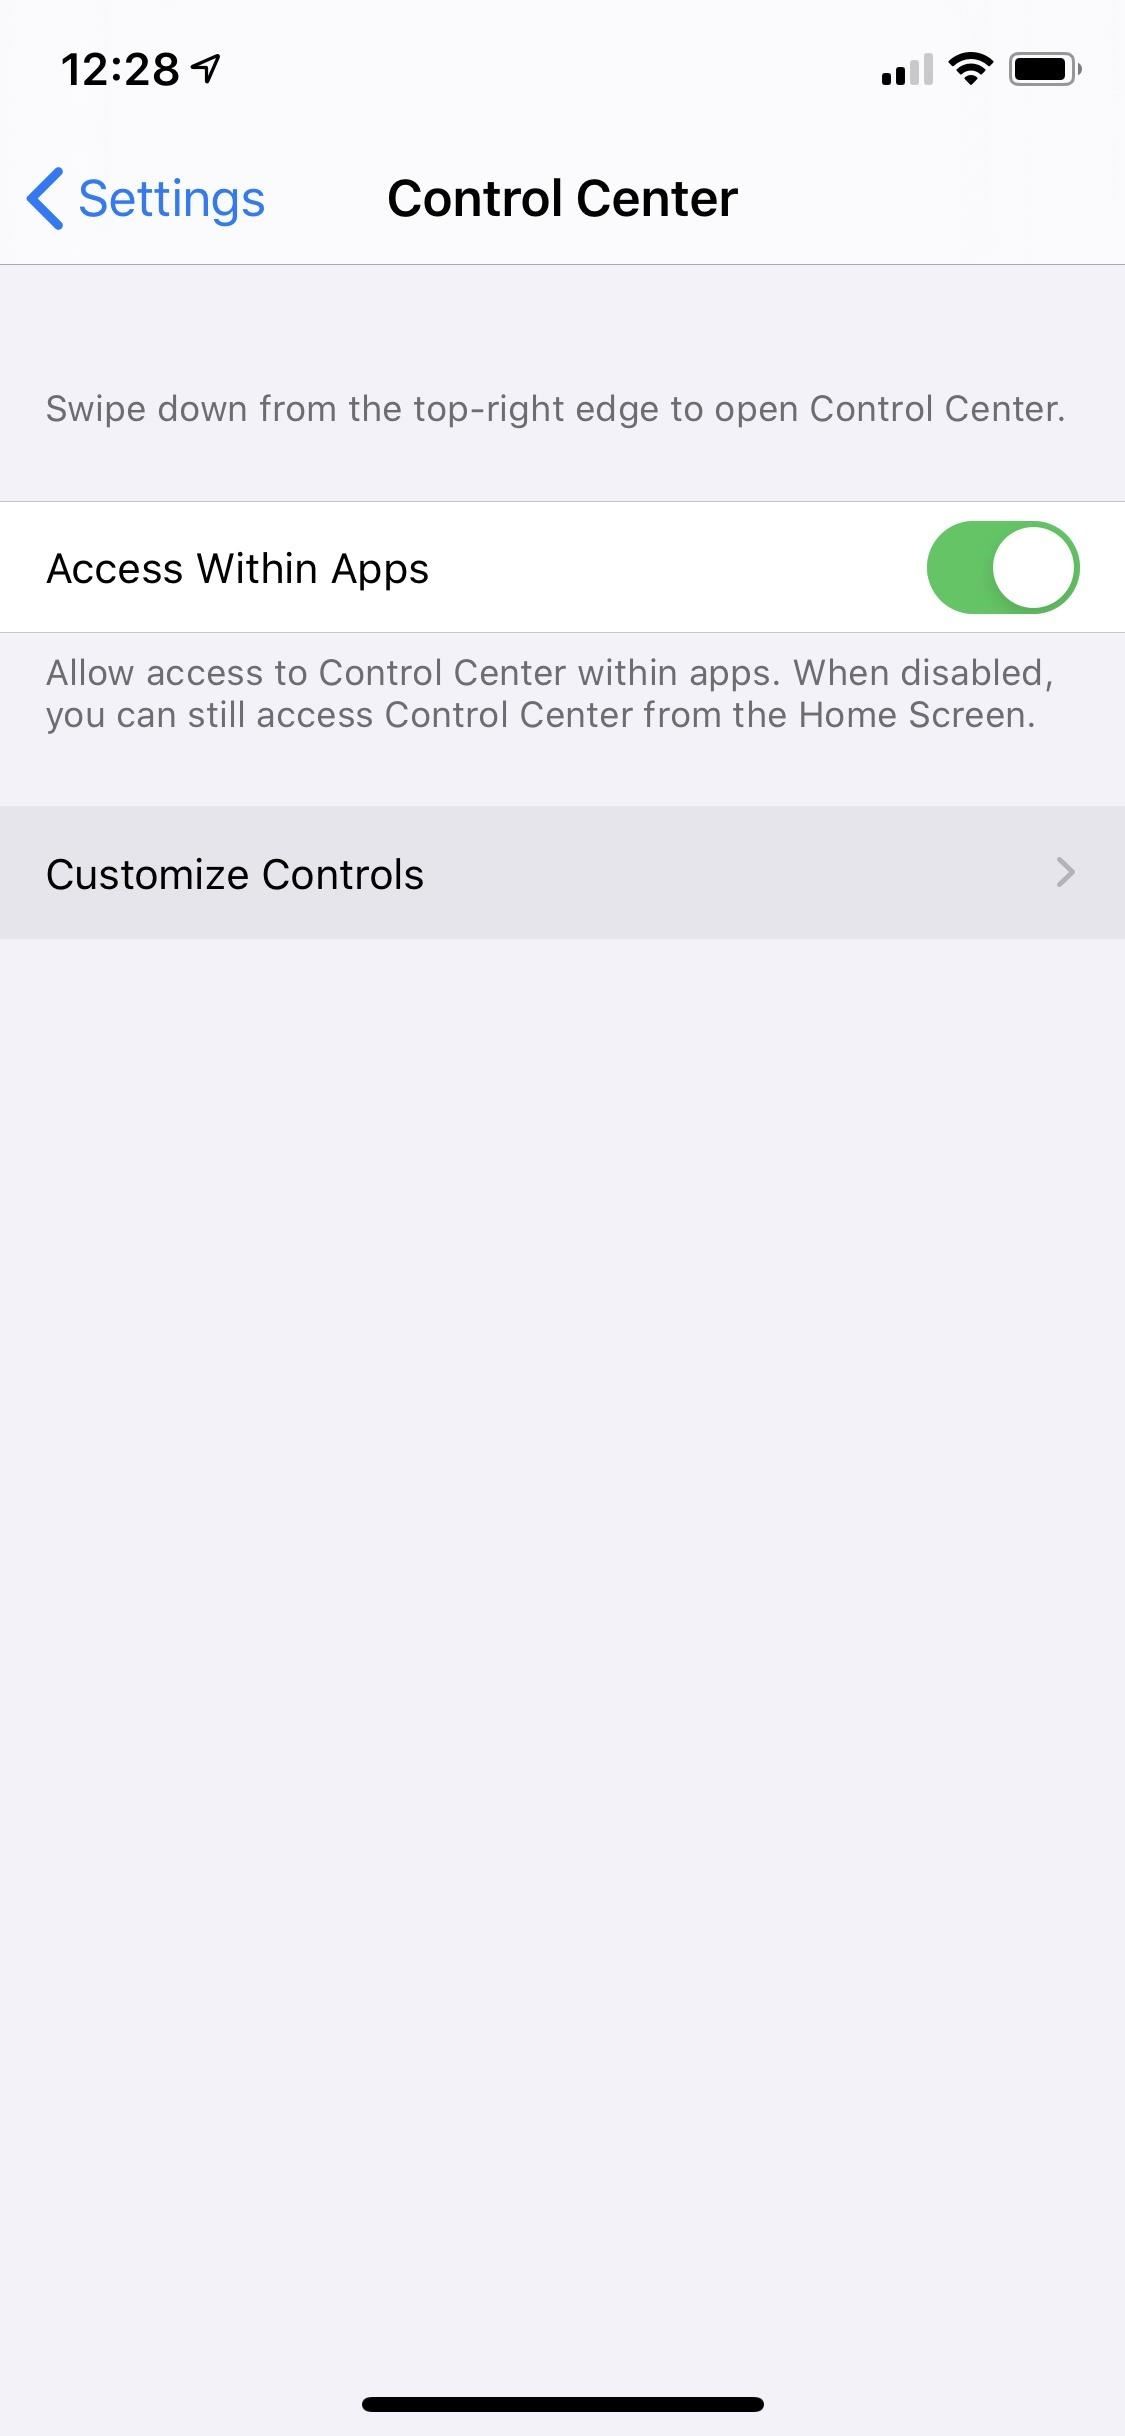 How to Record Your iPhone's Screen with Audio — No Jailbreak or Computer Needed